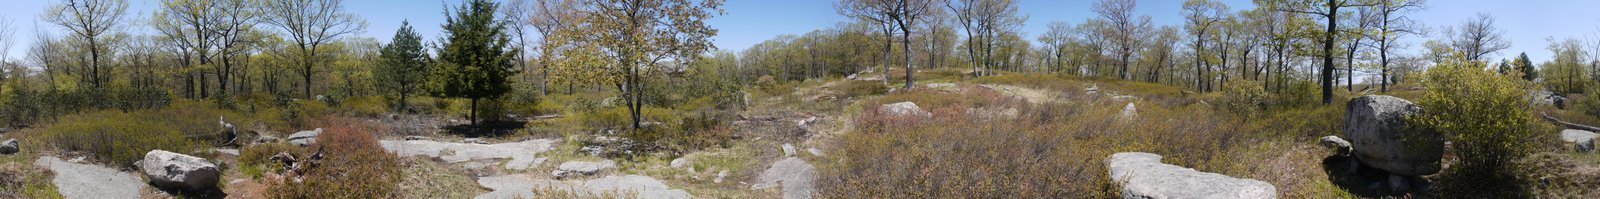 360° Panorama on Fingerboard Mountain, Harriman State Park, NY